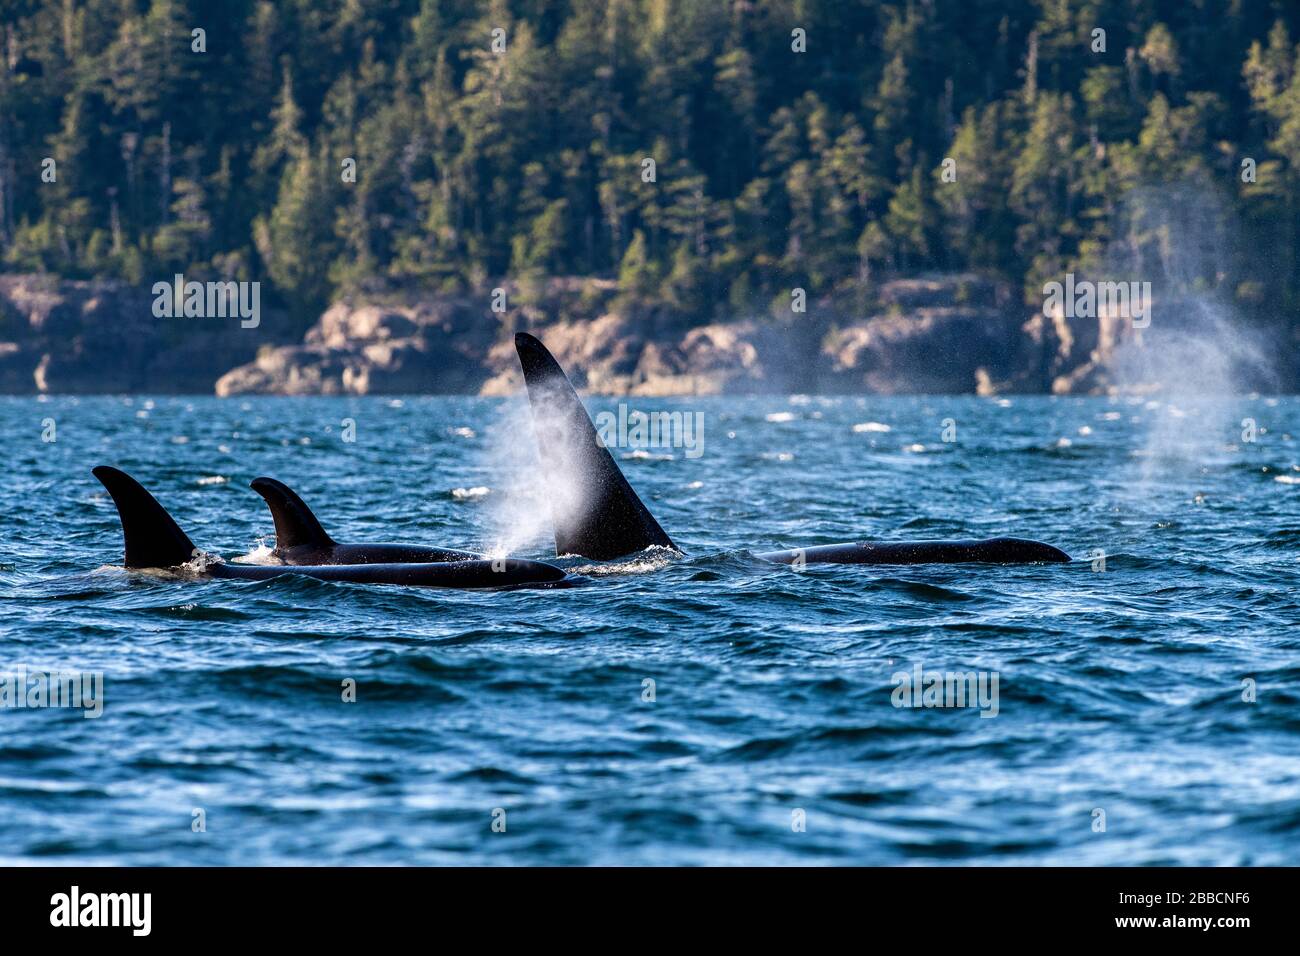 Northern Resident Orca (Orcinus orca) Whales (A pod), Johnstone Straight, Vancouver Island, BC Canada Stock Photo